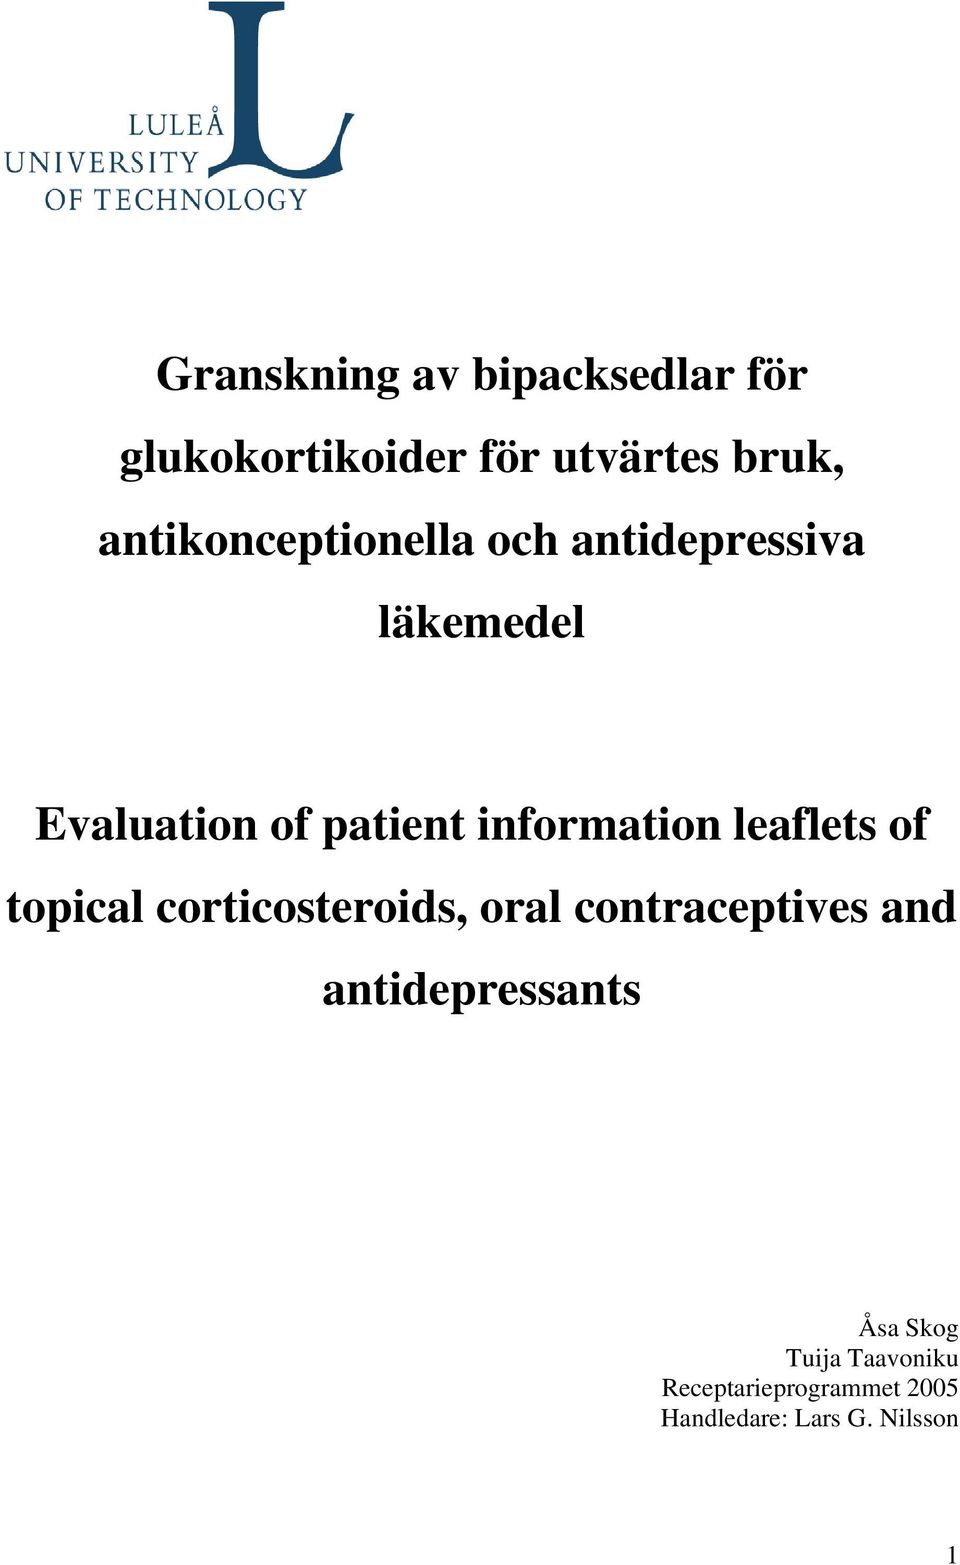 information leaflets of topical corticosteroids, oral contraceptives and